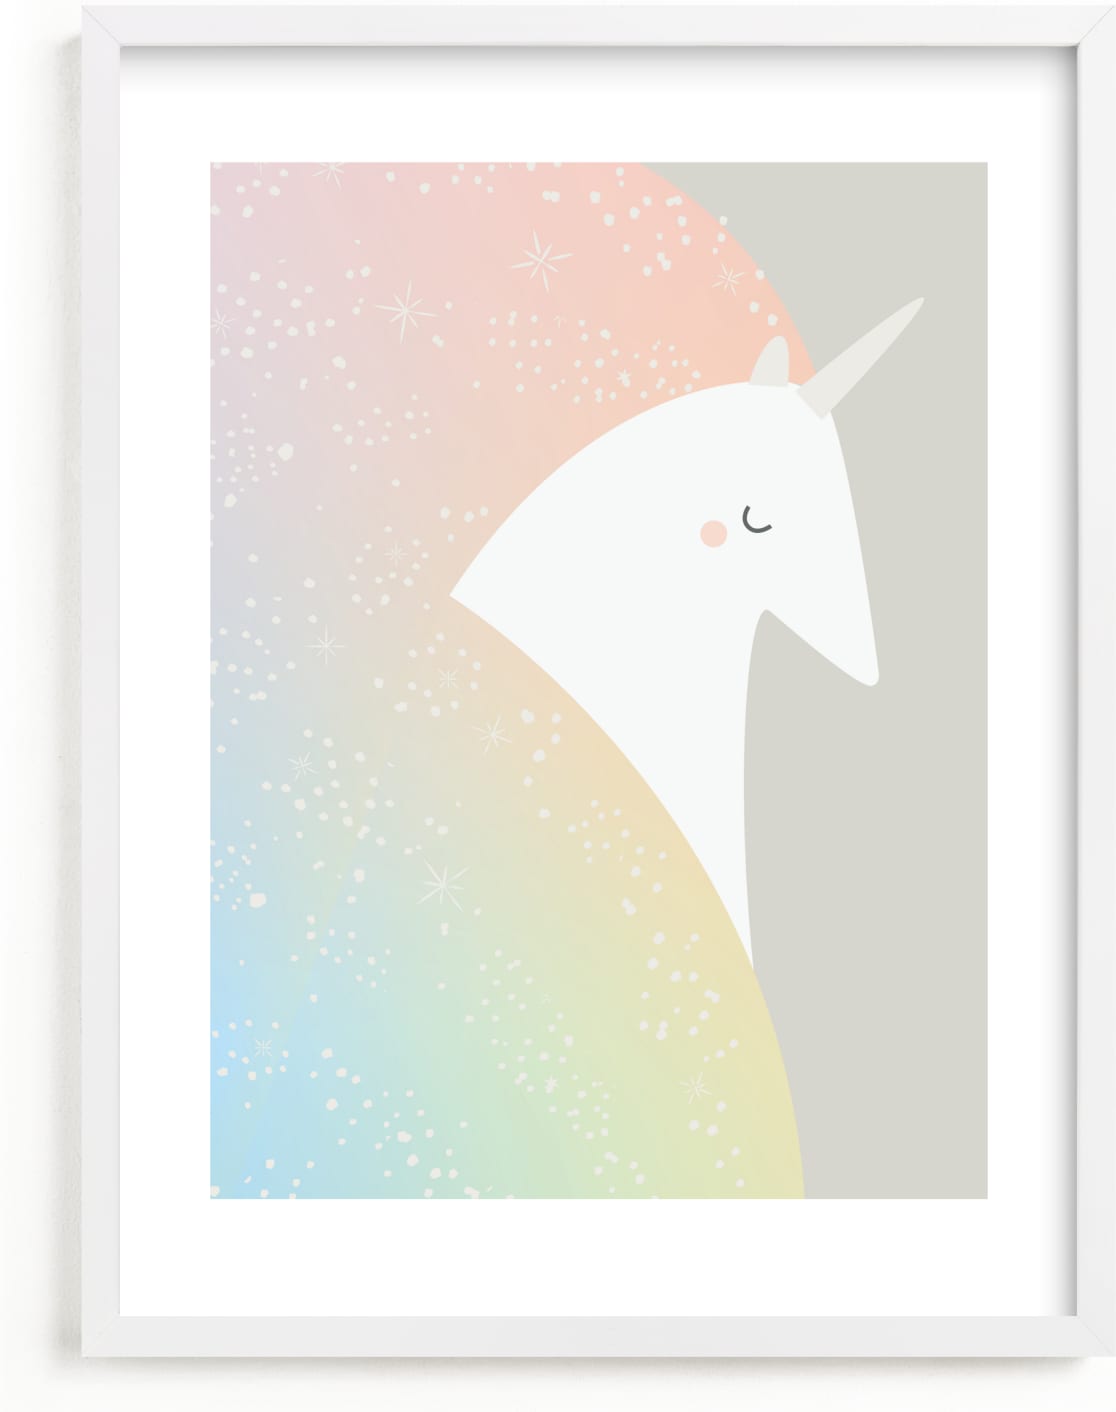 This is a colorful kids wall art by Lori Wemple called Unicorn.